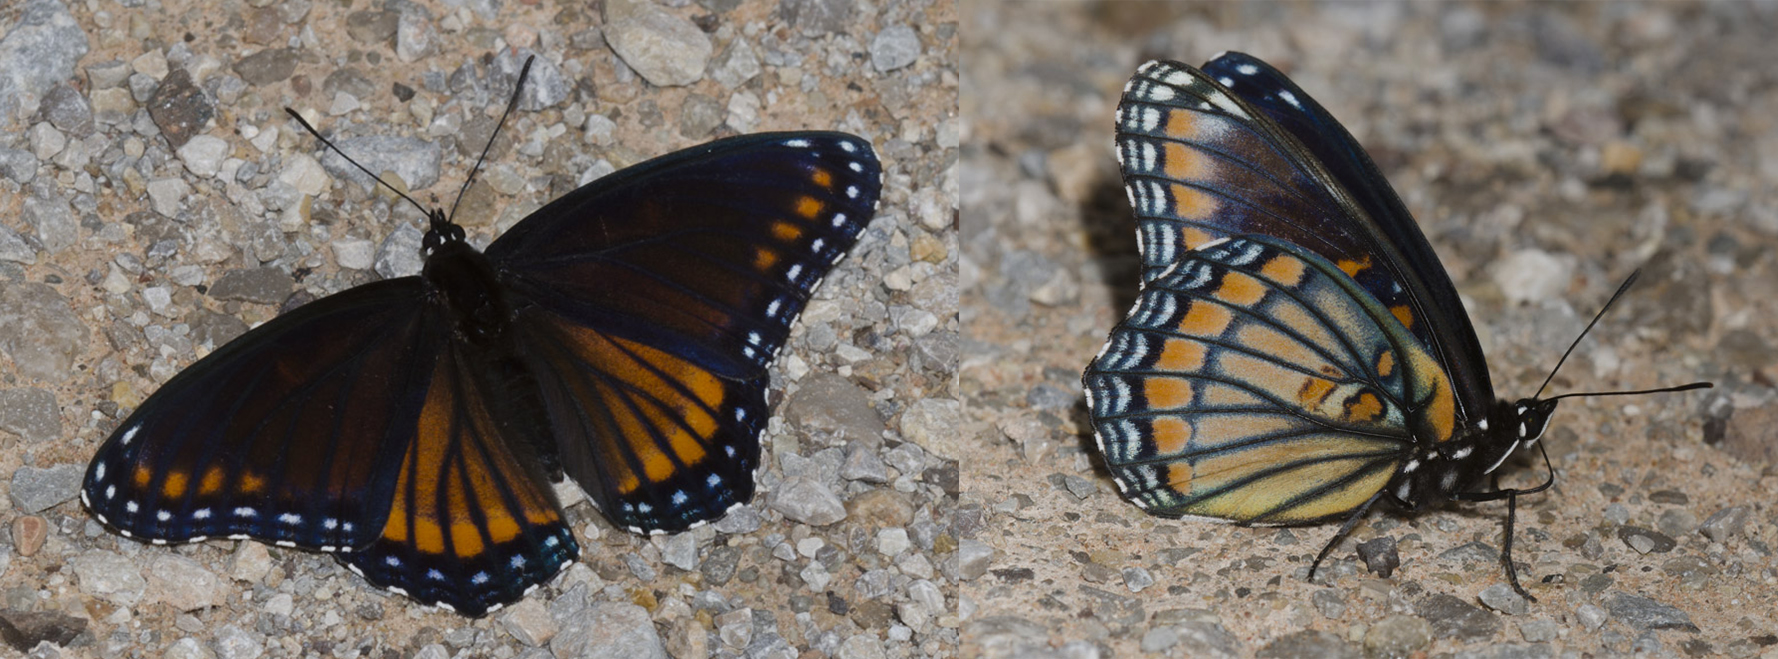 The hybrid butterfly, which embodies features of both the viceroy and the red-spotted purple, is shown in both a dorsal and ventral view.